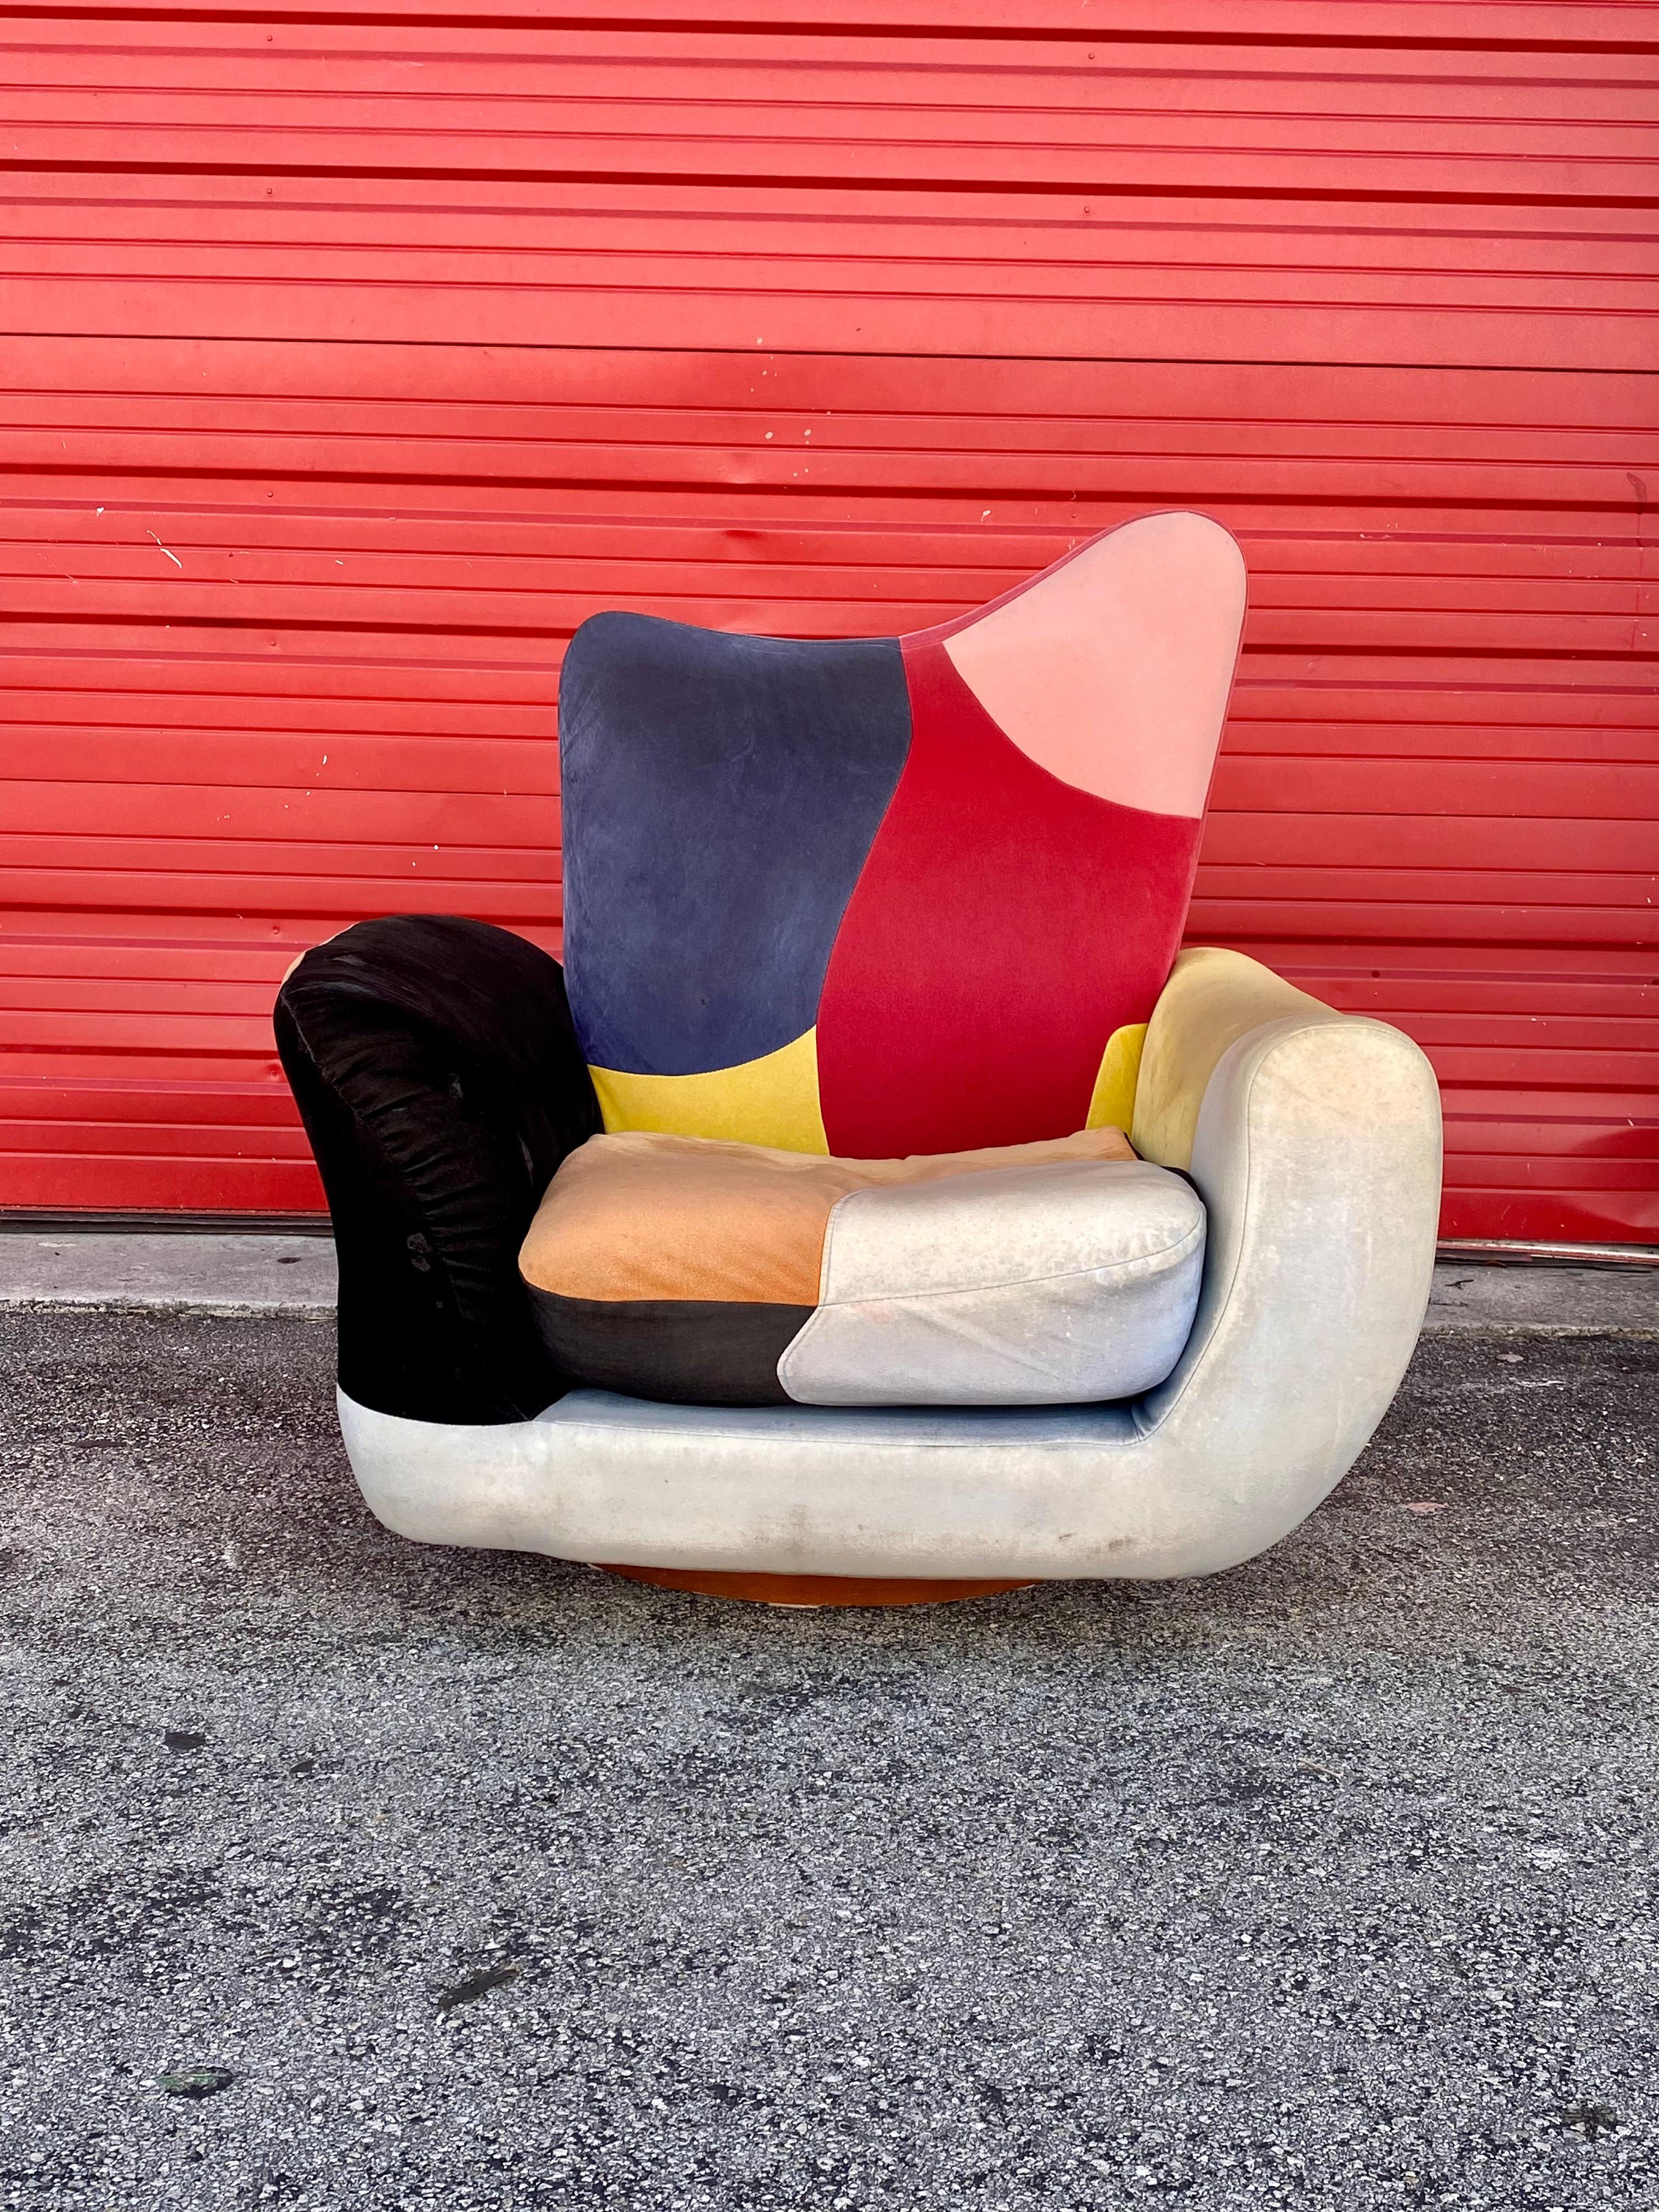 The beautiful rare swivel chair is statement piece which is also extremely comfortable and packed with personality! Attributed to Adrian Pearsall. Just look at the gorgeous lines and curves on this beauty! Plush colorful cushioning and an